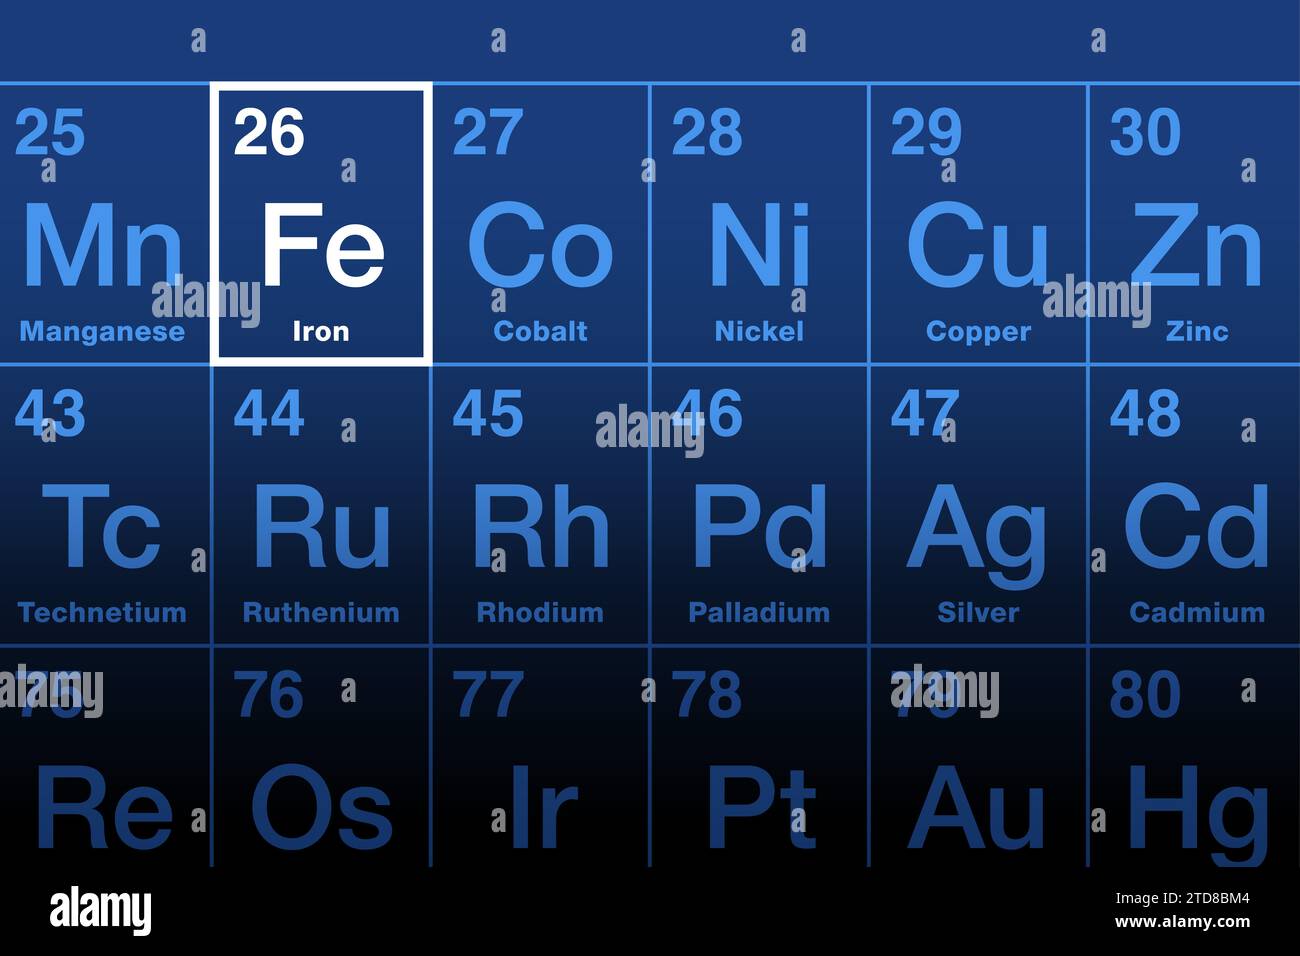 Iron element on the periodic table. Ferromagnetic transition metal, with the element symbol Fe from Latin ferrum, and atomic number 26. Stock Photo